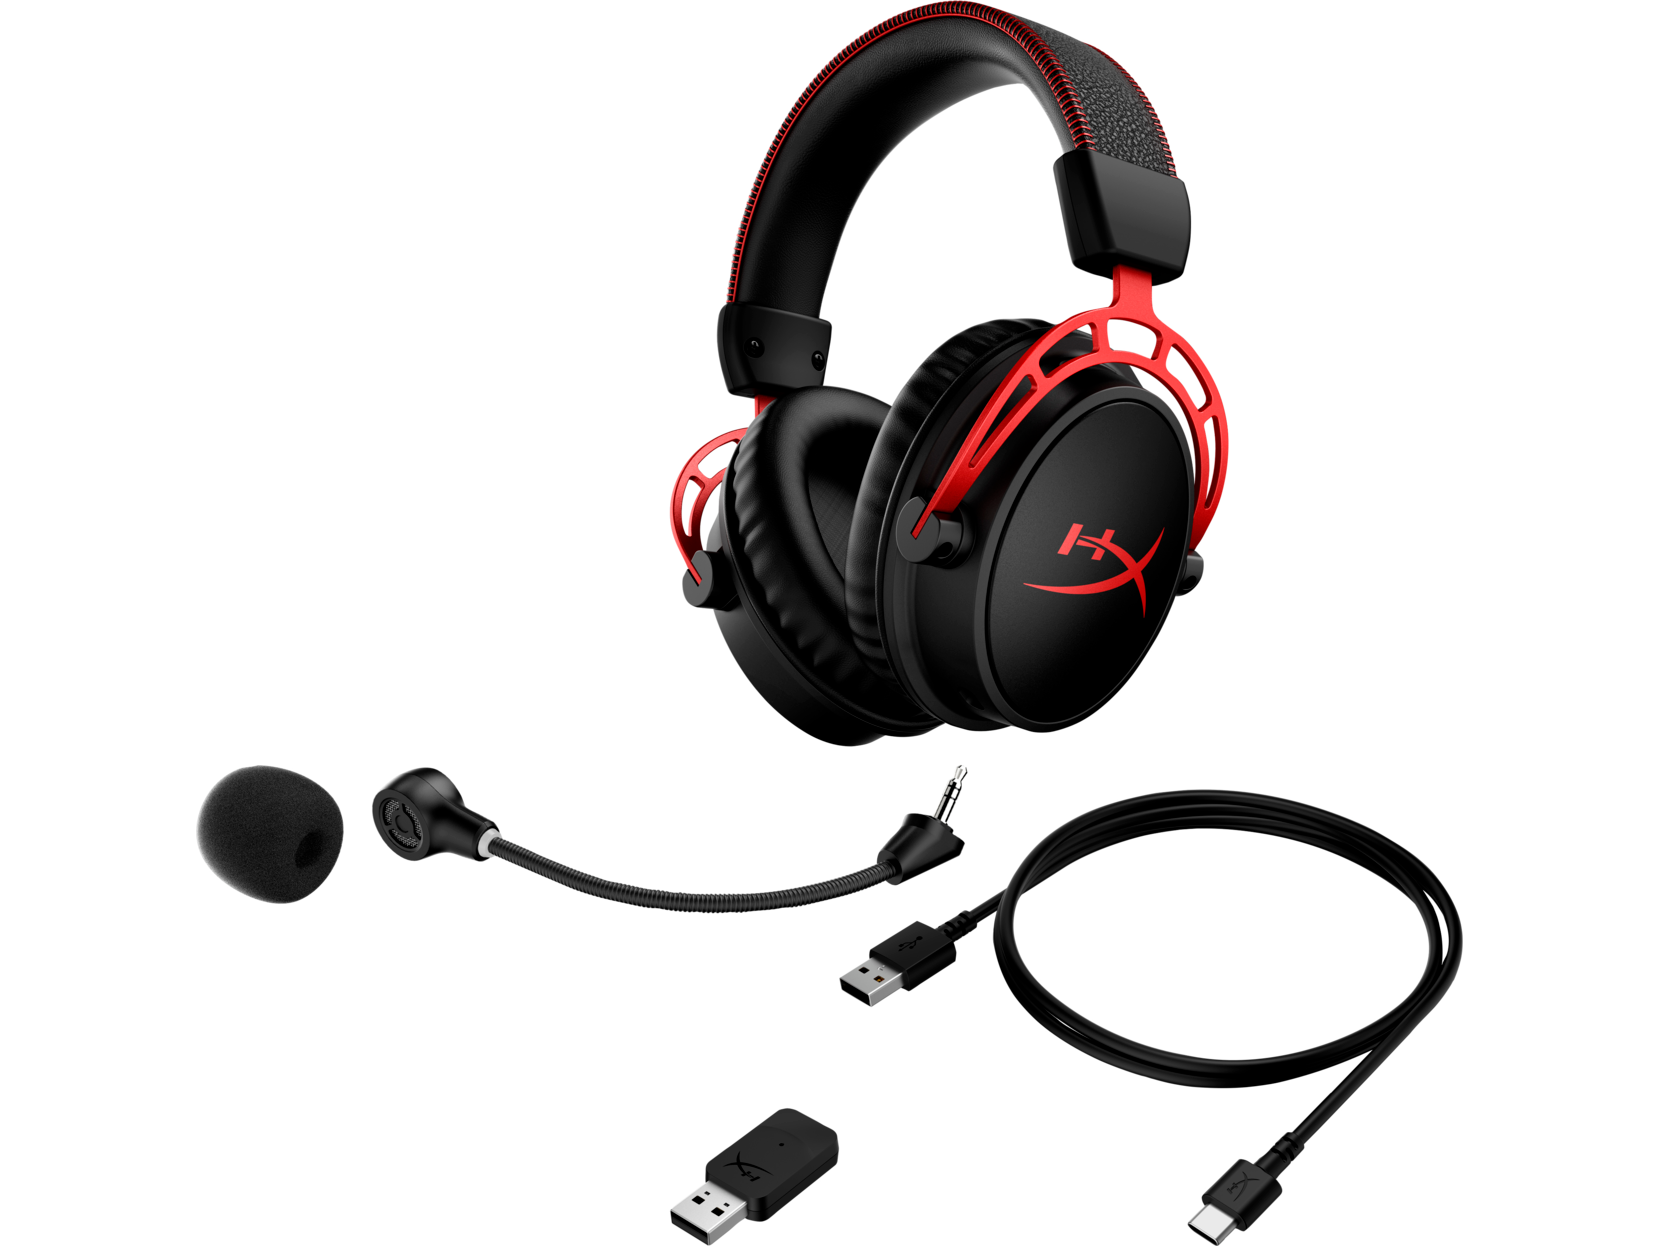 HyperX Cloud Alpha Wireless Over-Ear Gaming Headset, Red - image 2 of 7